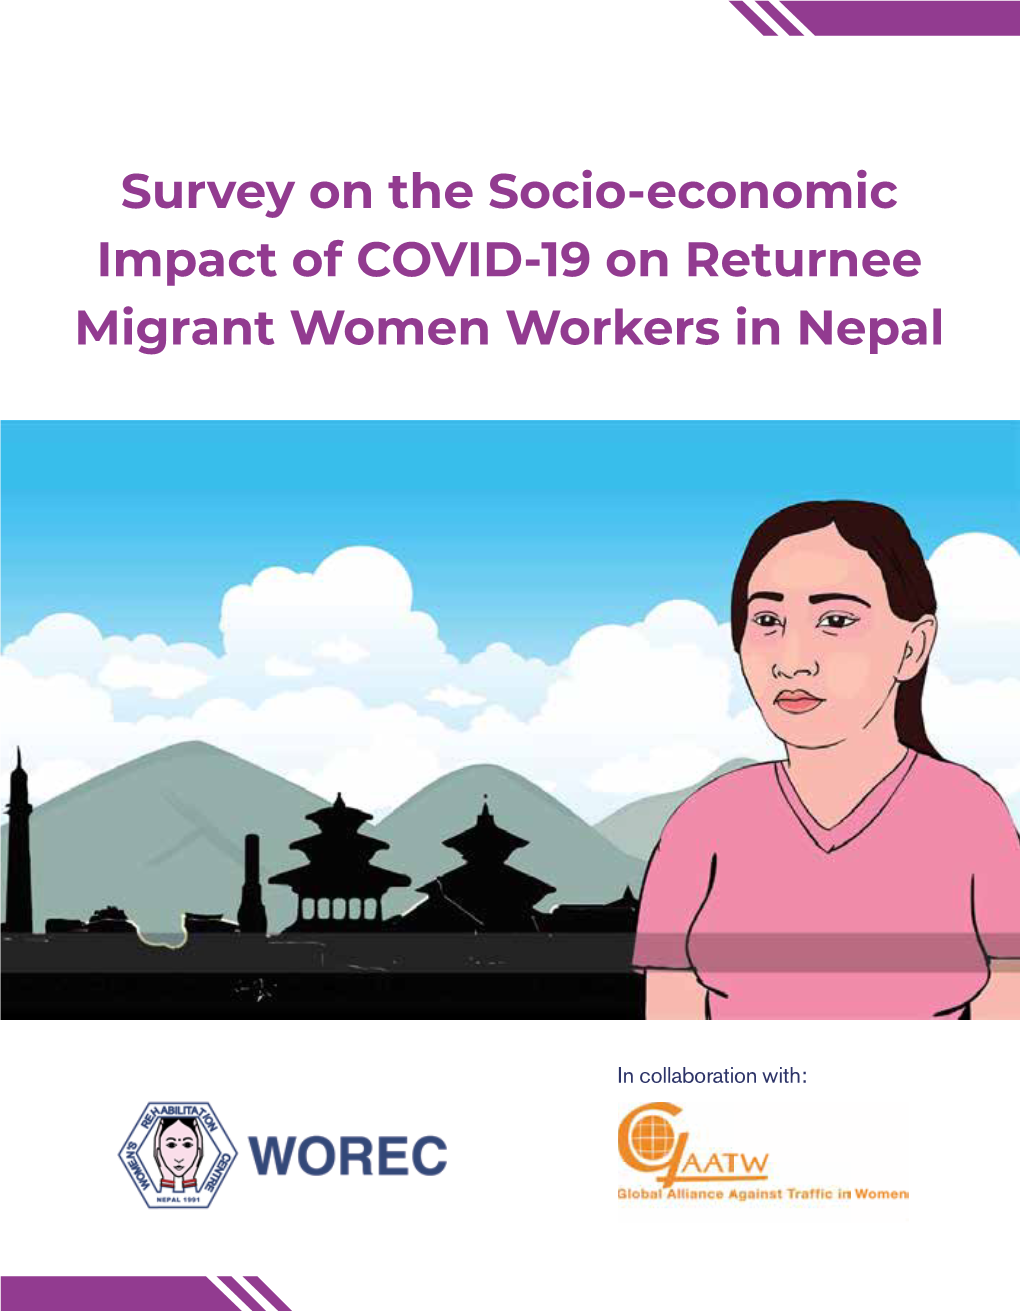 Survey on the Socio-Economic Impact of COVID-19 on Returnee Migrant Women Workers in Nepal